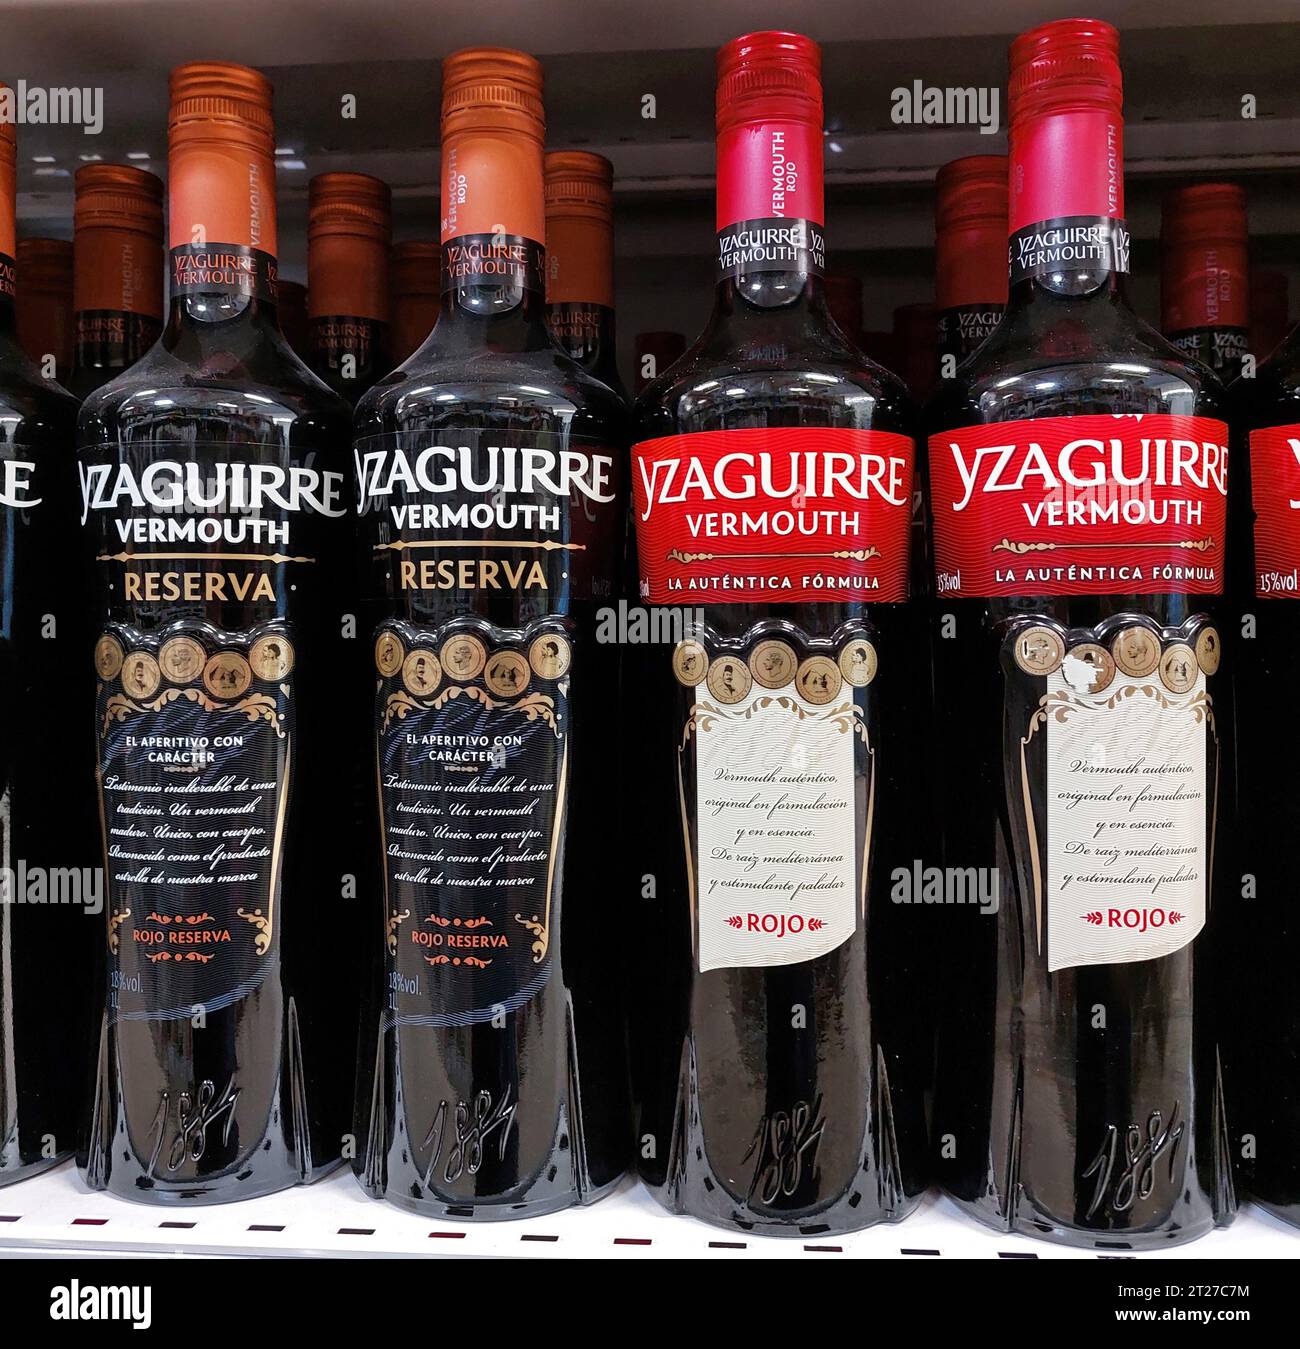 Yzaguirre Rojo Vermouth bottles in a supermarket Stock Photo